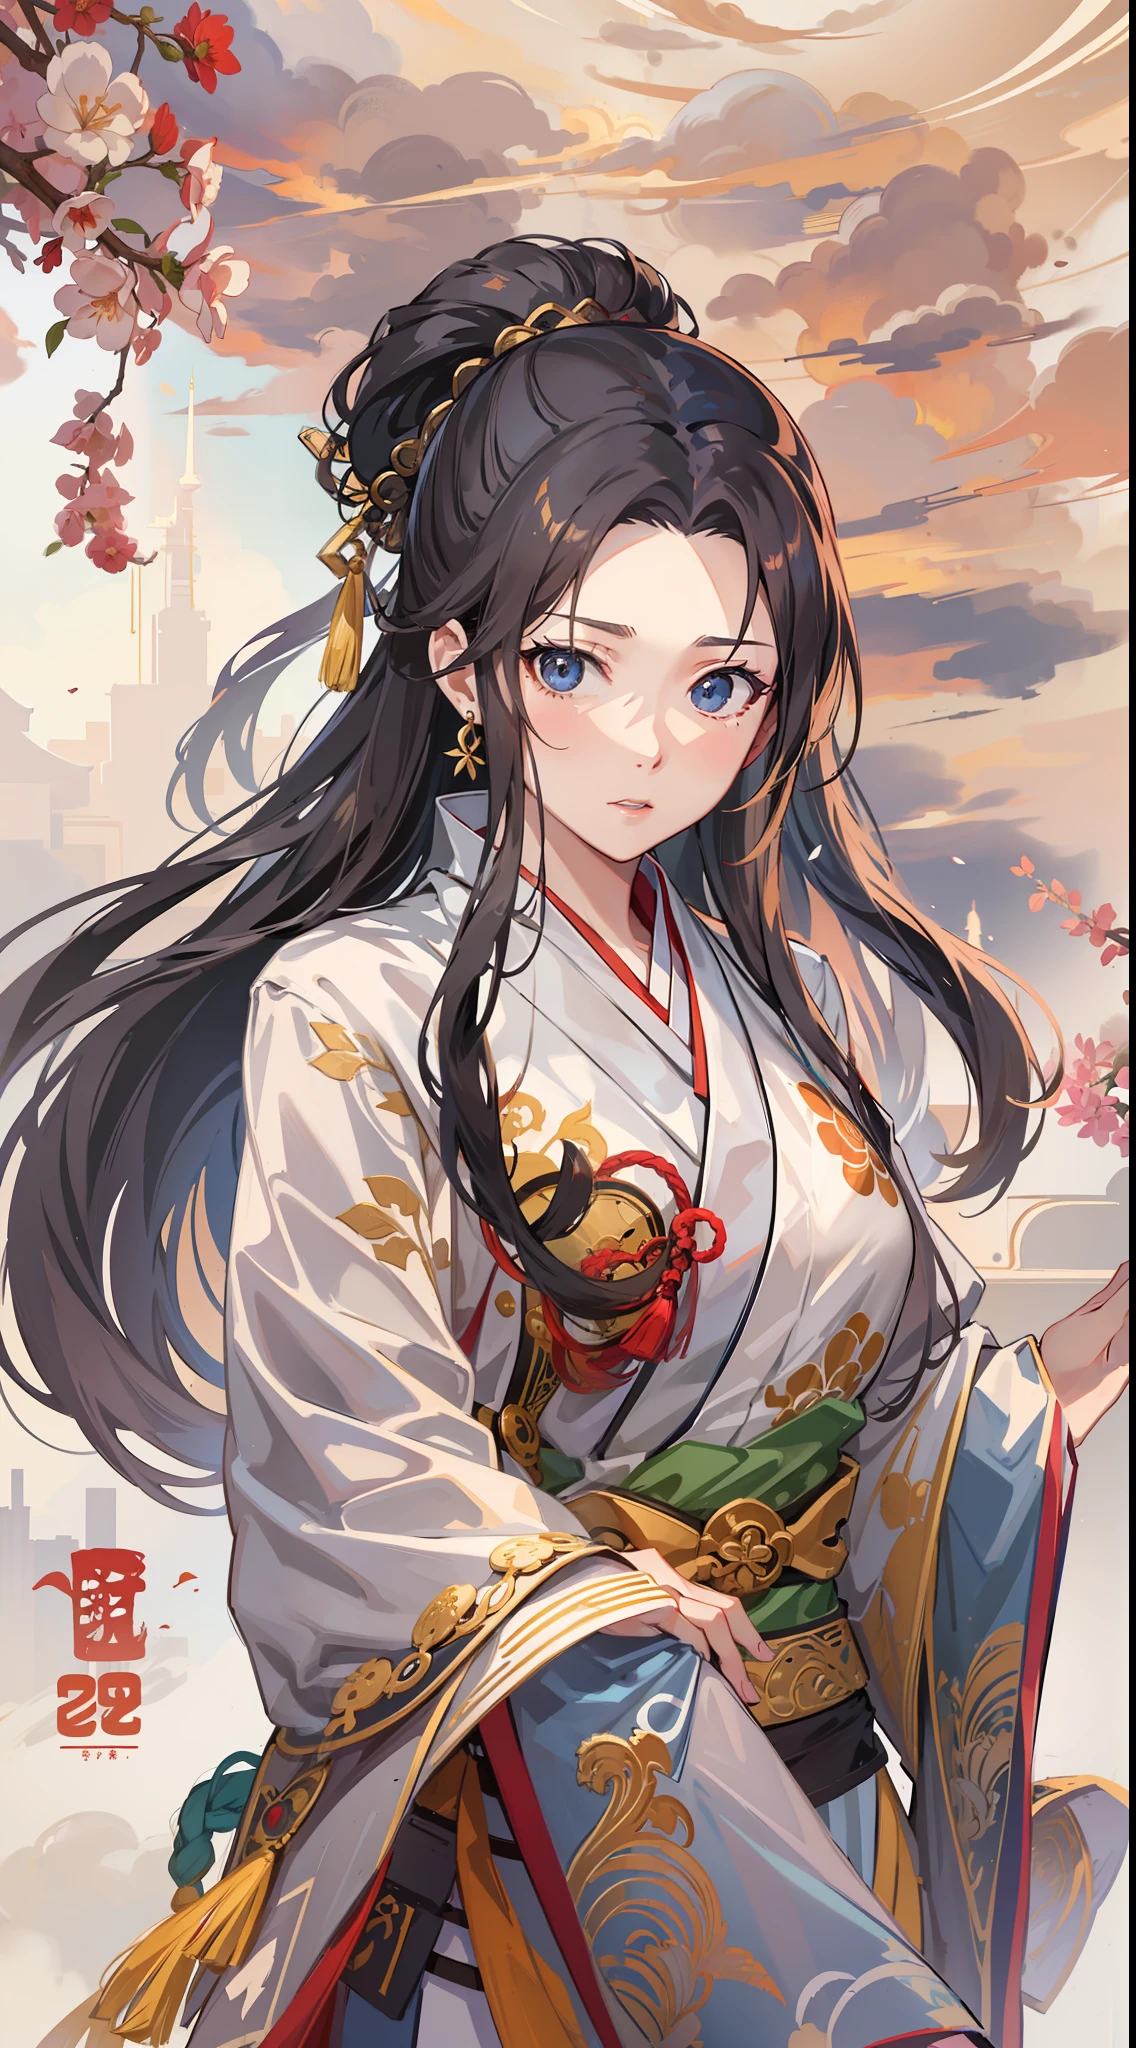 Write a novel，cultivating immortals，The protagonist is called Tatsuno，The story is probably reborn back to 18 years old，Start revenge，Various experiences，The heroine's name is Bai Yue，Prominent family lineage